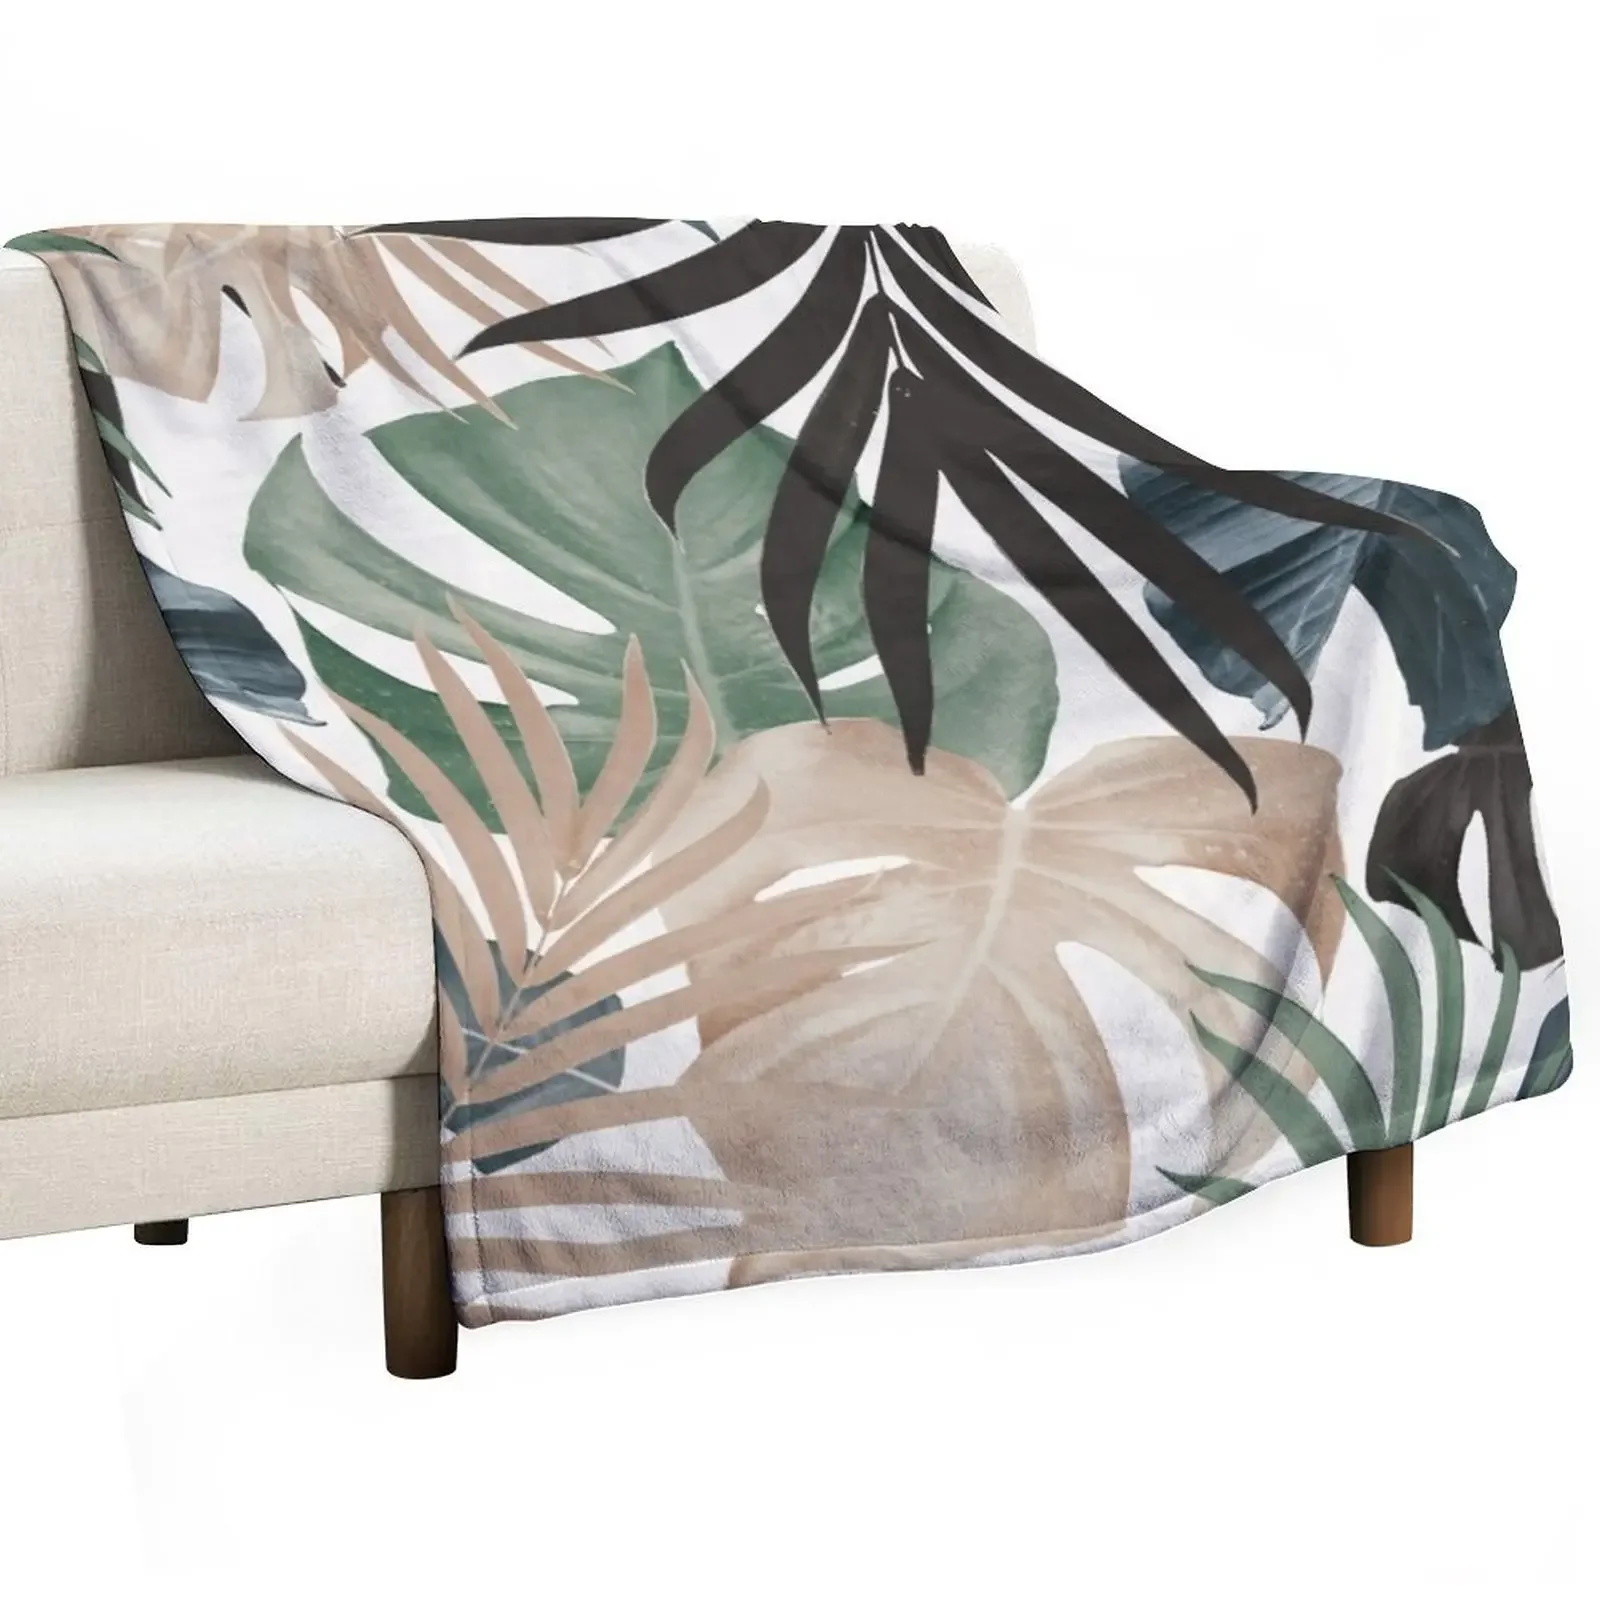 

Tropical Jungle Leaves Pattern #13 (Fall Colors) #tropical #decor #art Throw Blanket Designers funny gift Fluffy Shaggy Blankets